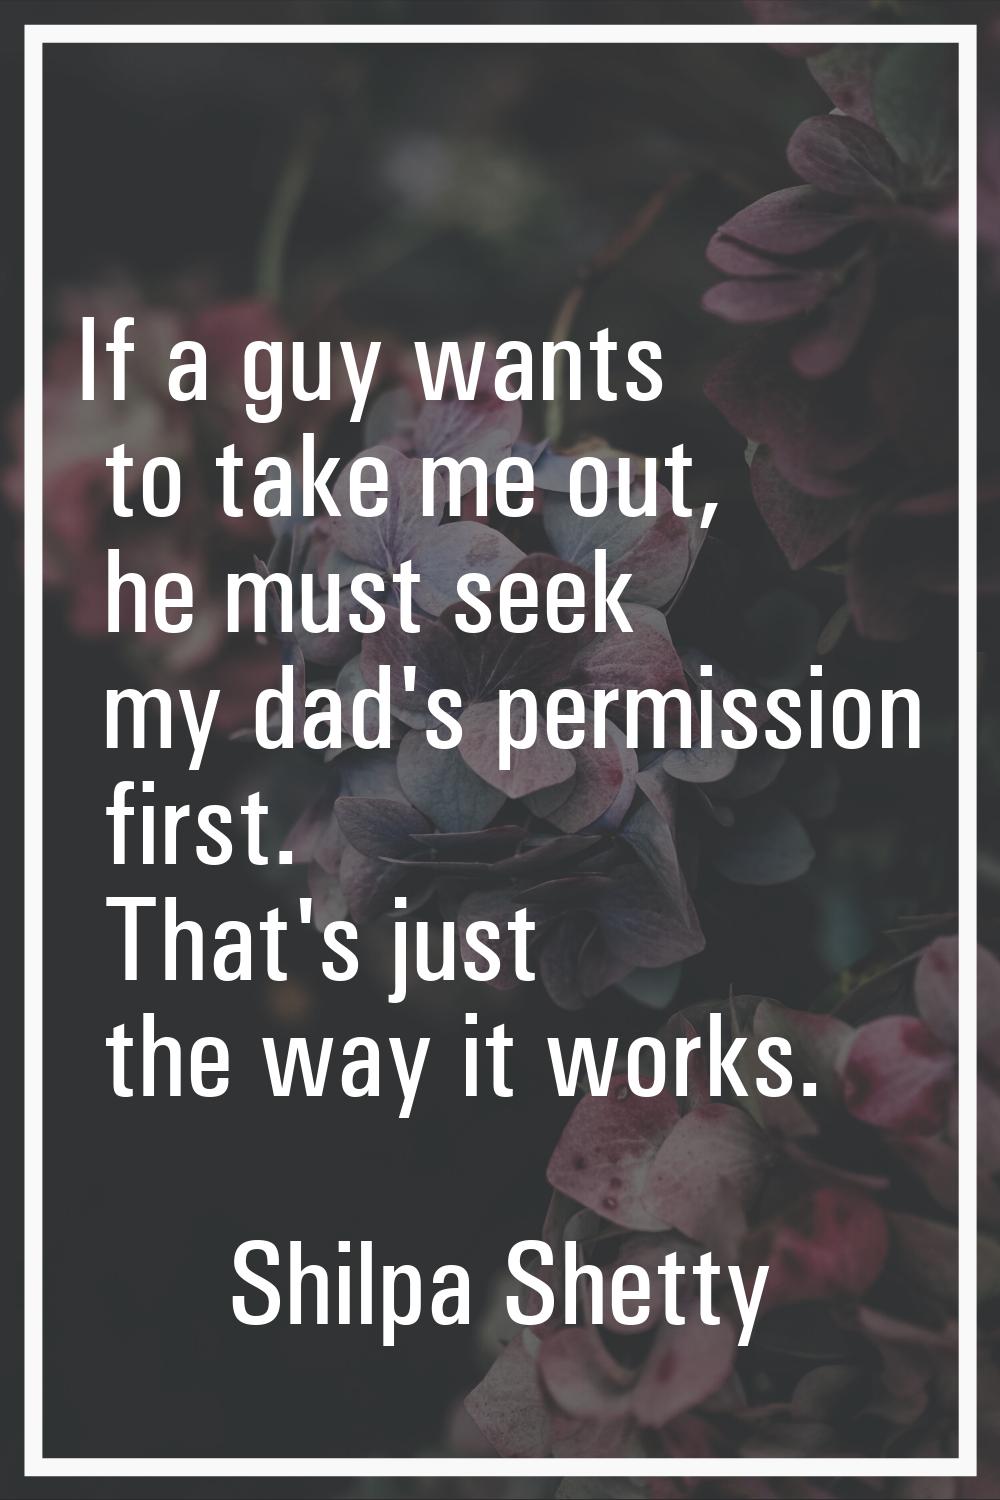 If a guy wants to take me out, he must seek my dad's permission first. That's just the way it works